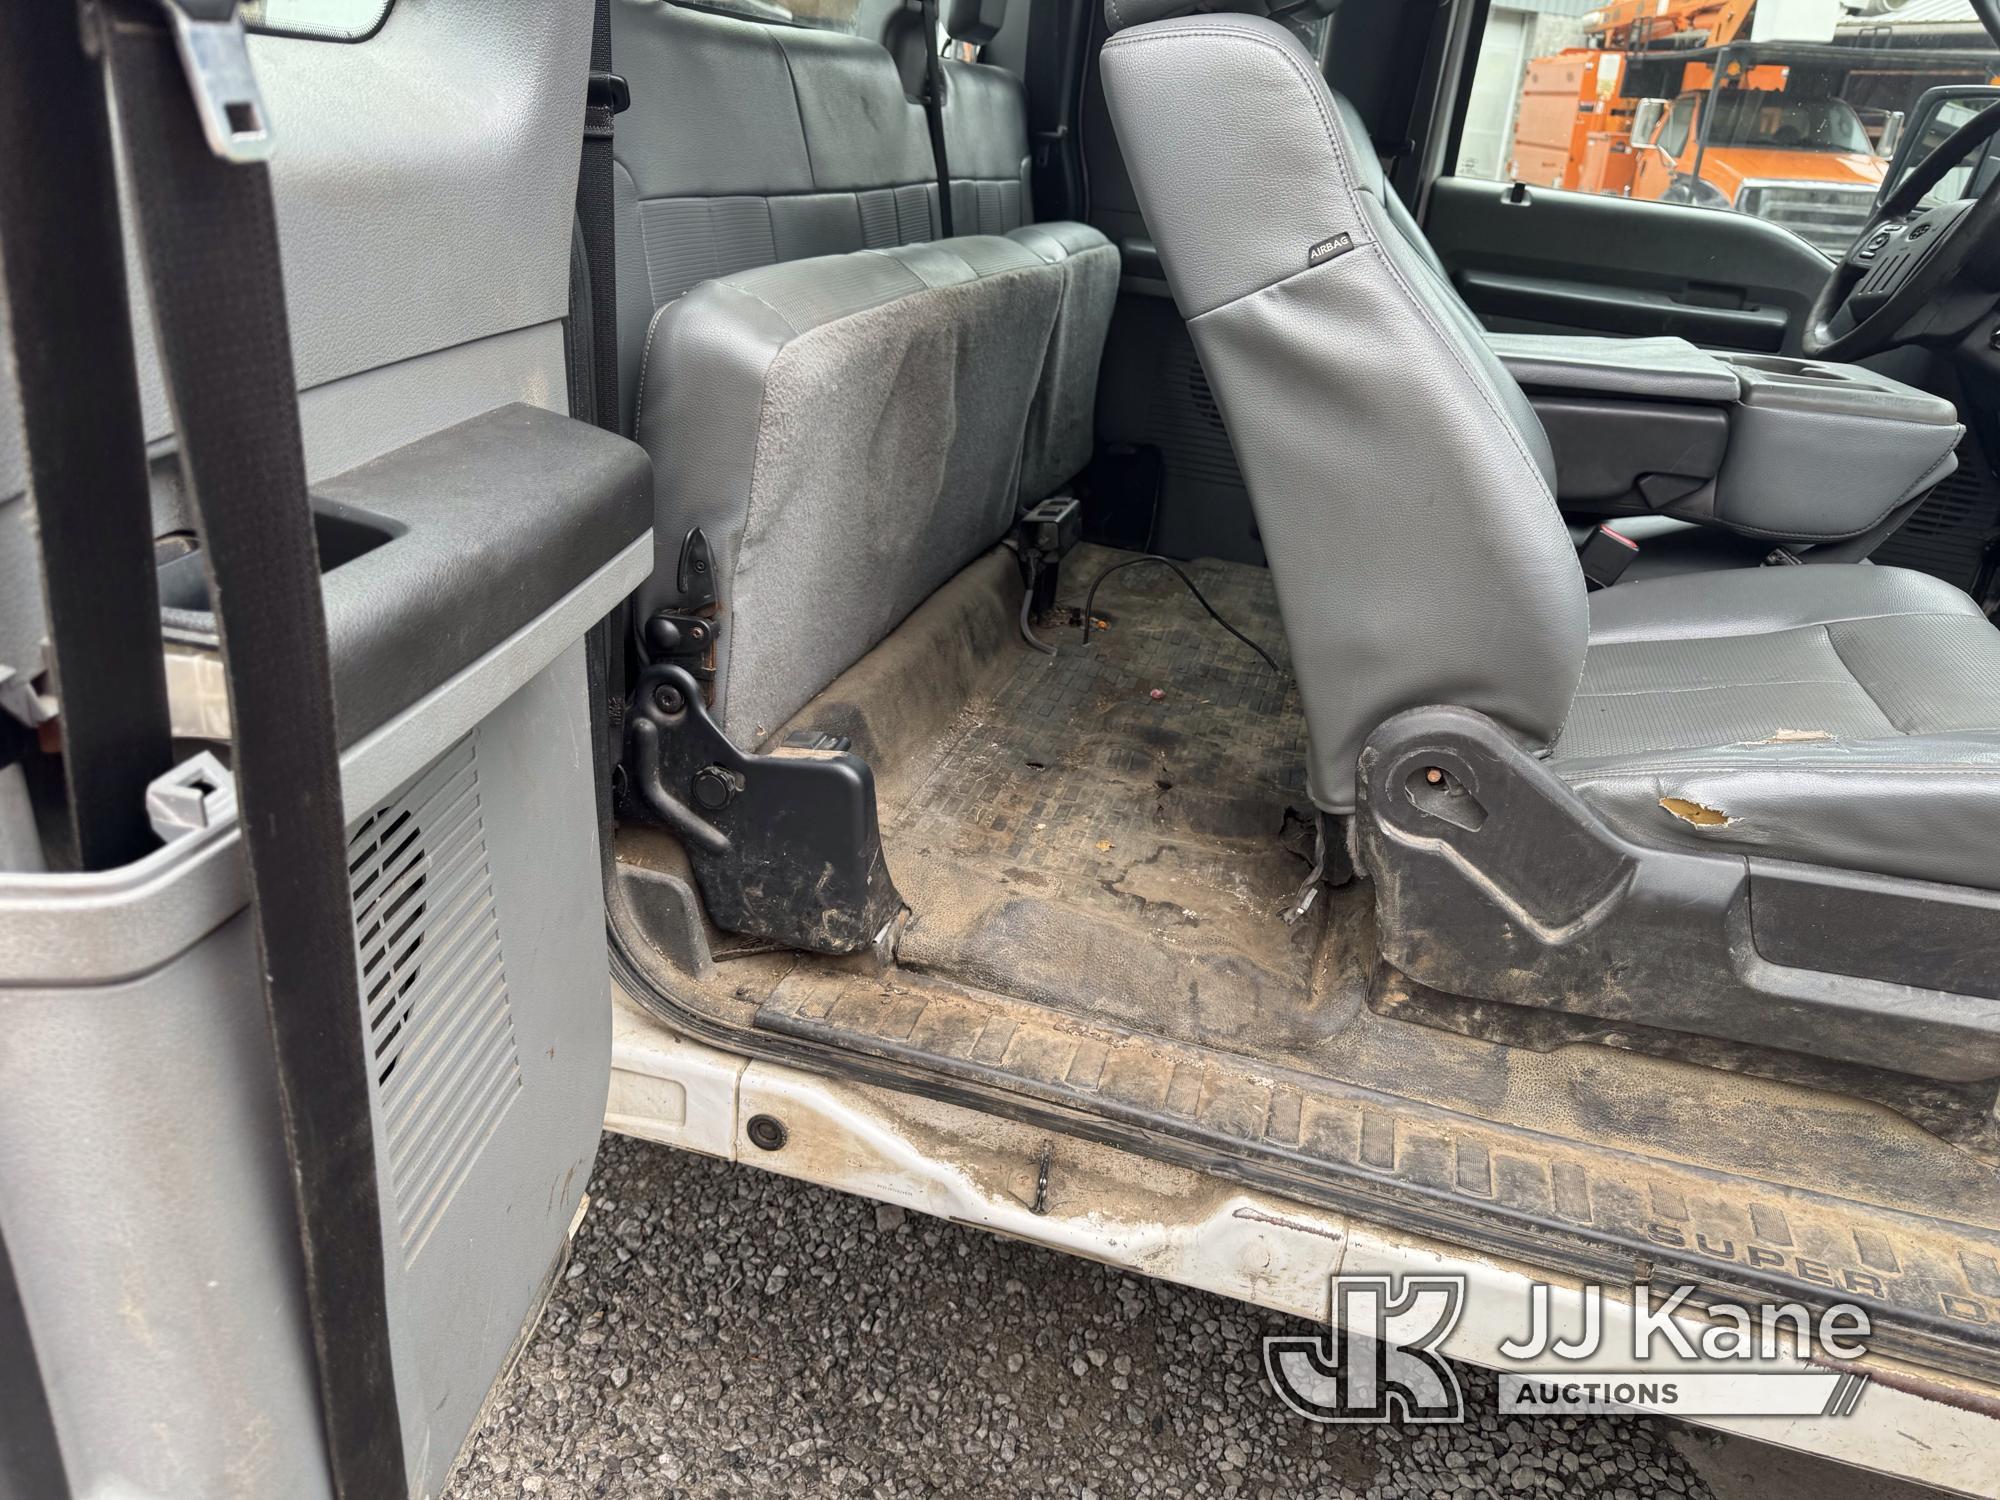 (Hanover, WV) 2015 Ford F250 4x4 Extended-Cab Pickup Truck Runs & Moves) (Jump To Start, Minor Body